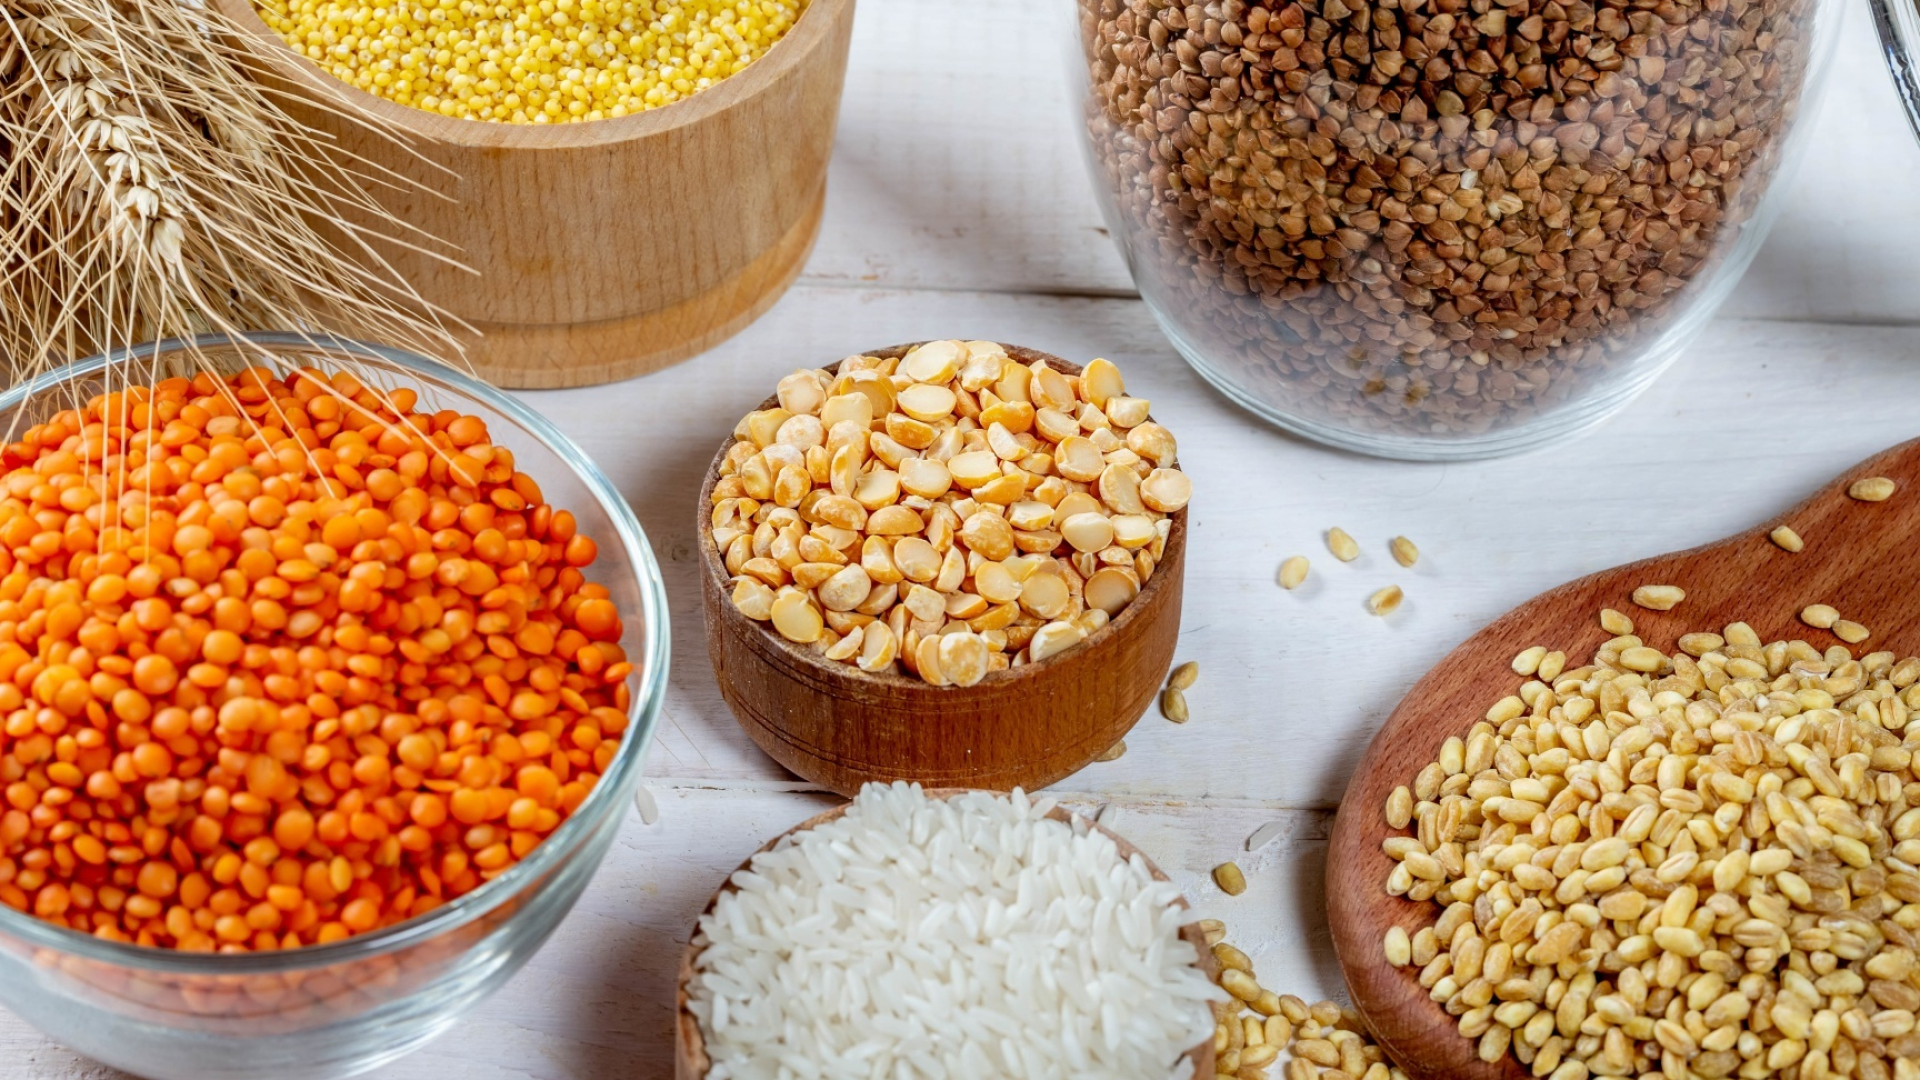 Seeds: Rice, Beans, Cereals, Plant's fruit used for food. 1920x1080 Full HD Wallpaper.